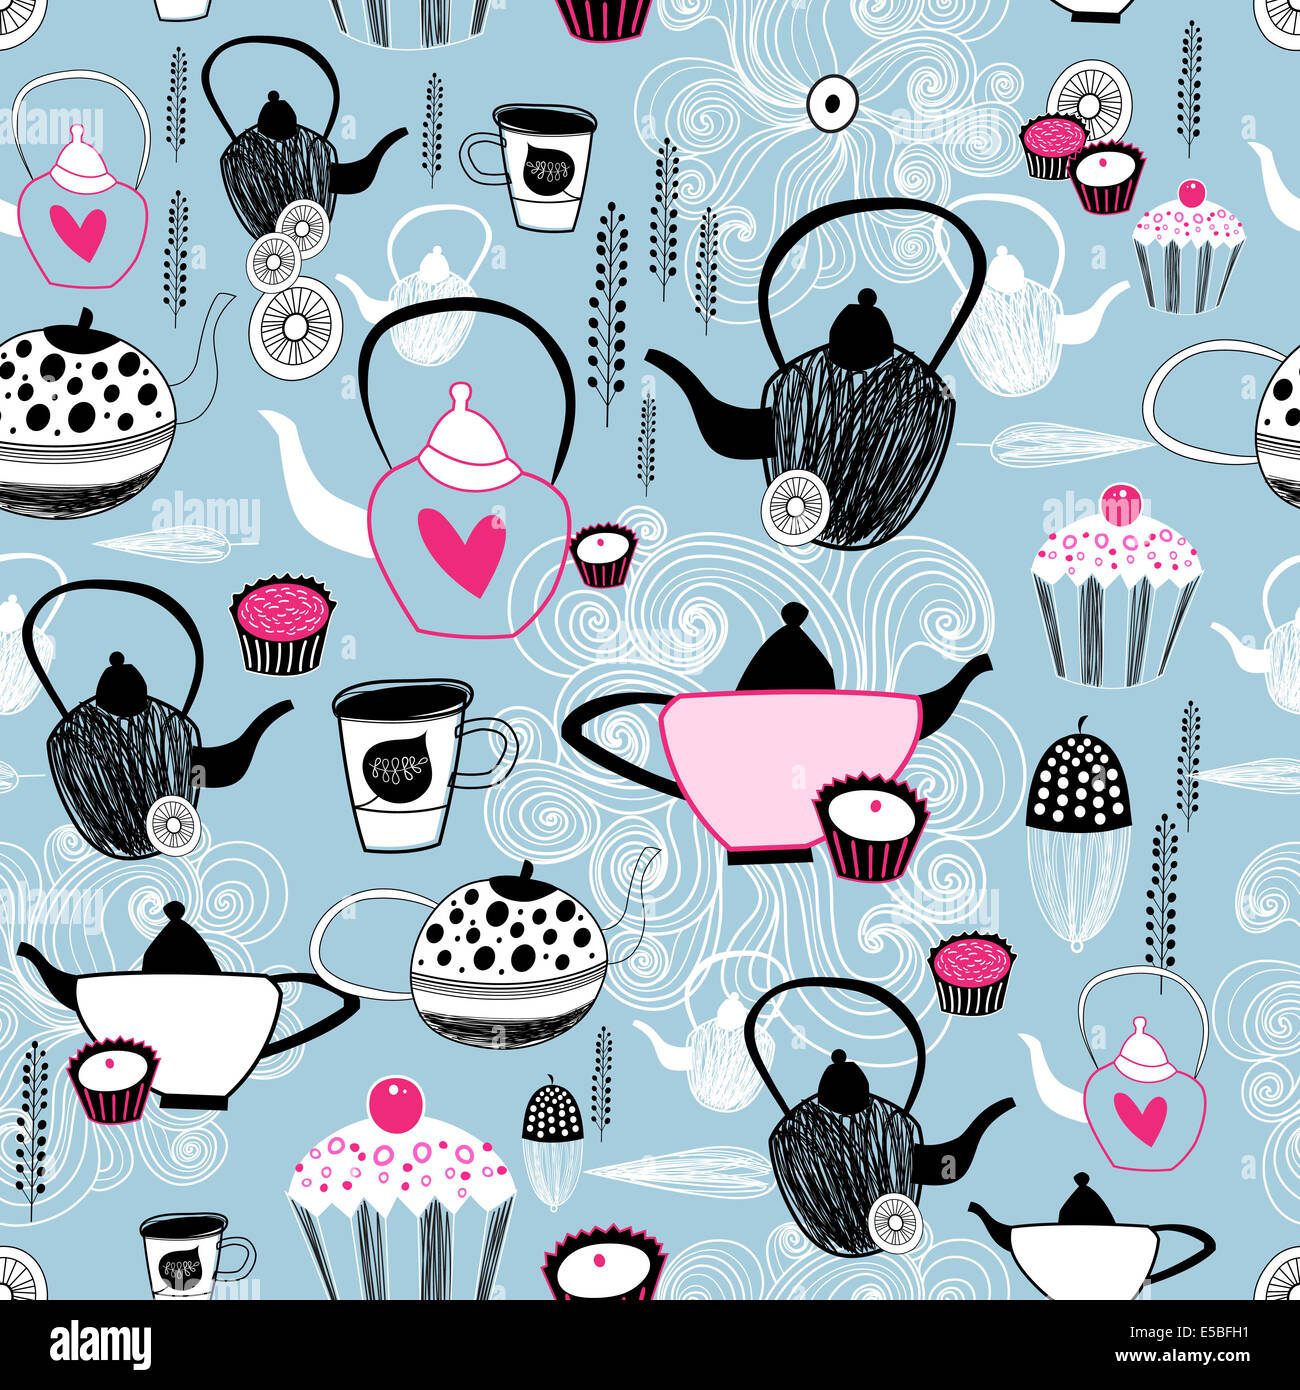 Graphic seamless pattern with kitchen utensils and cake on a blue background Stock Photo